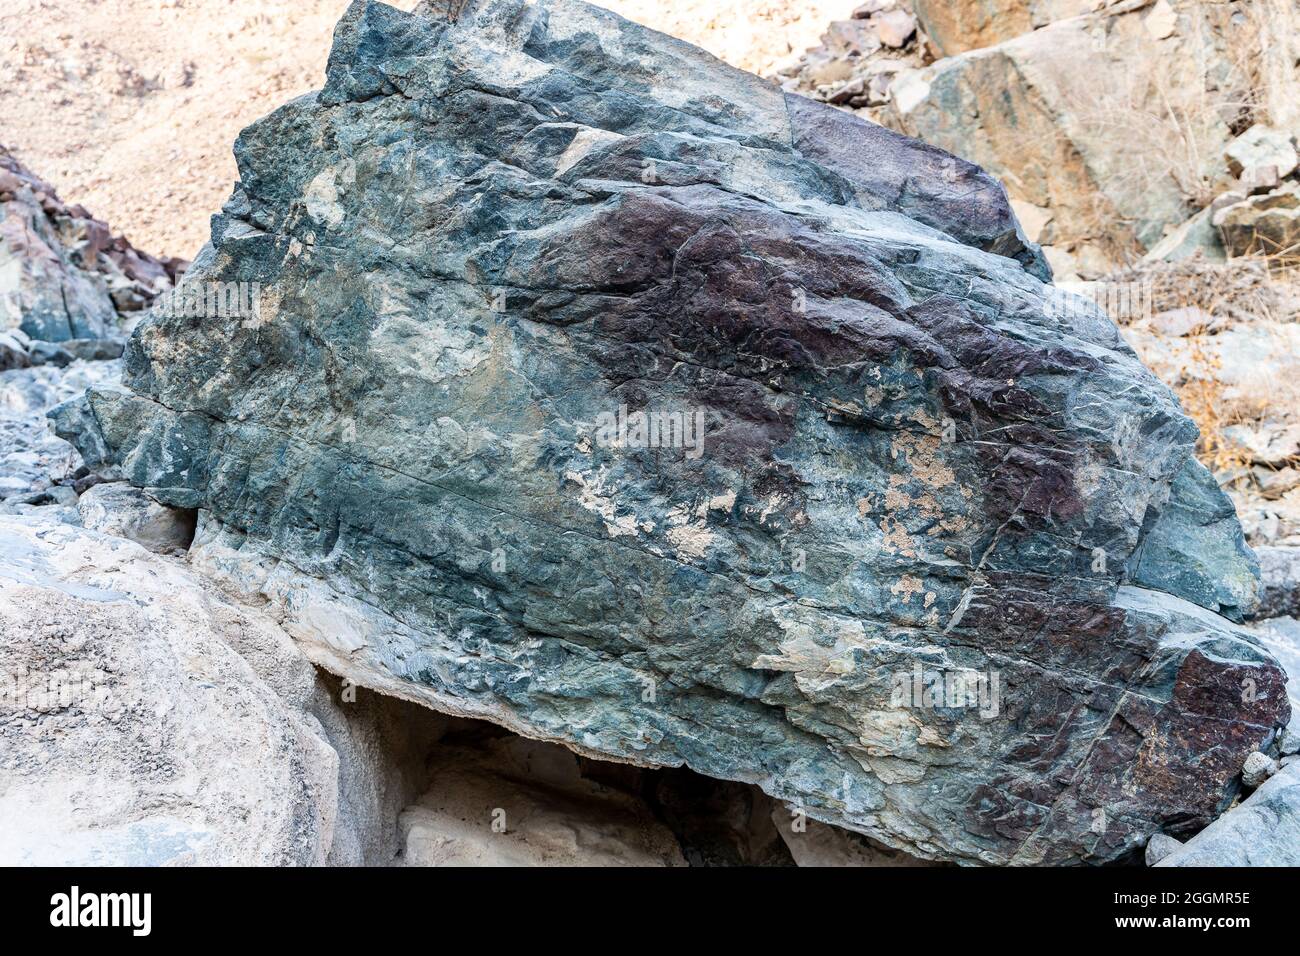 Raw ore of copper, green stones and rocks containing copper in old mining area, Hajar Mountains, United Arab Emirates. Stock Photo